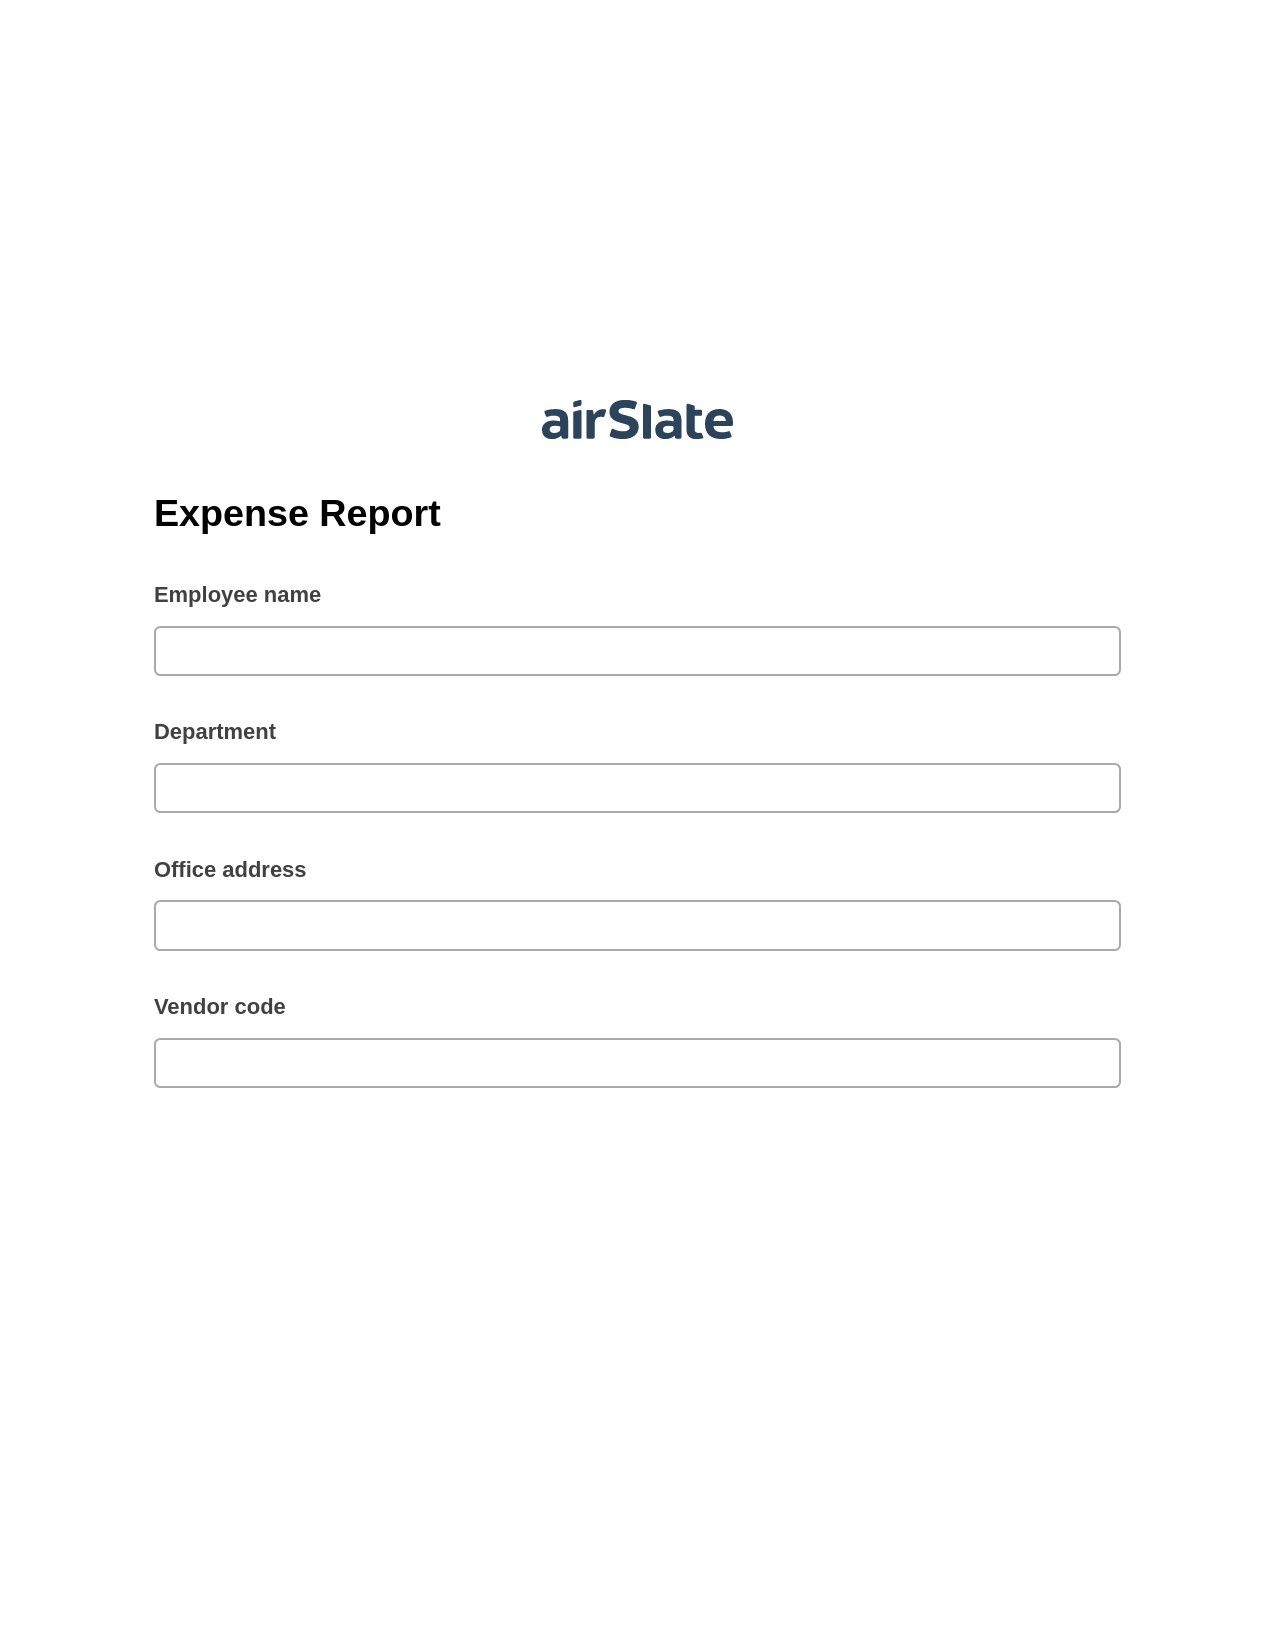 Expense Report Pre-fill Slate from MS Dynamics 365 Records Bot, Export to MS Dynamics 365 Bot, Post-finish Document Bot